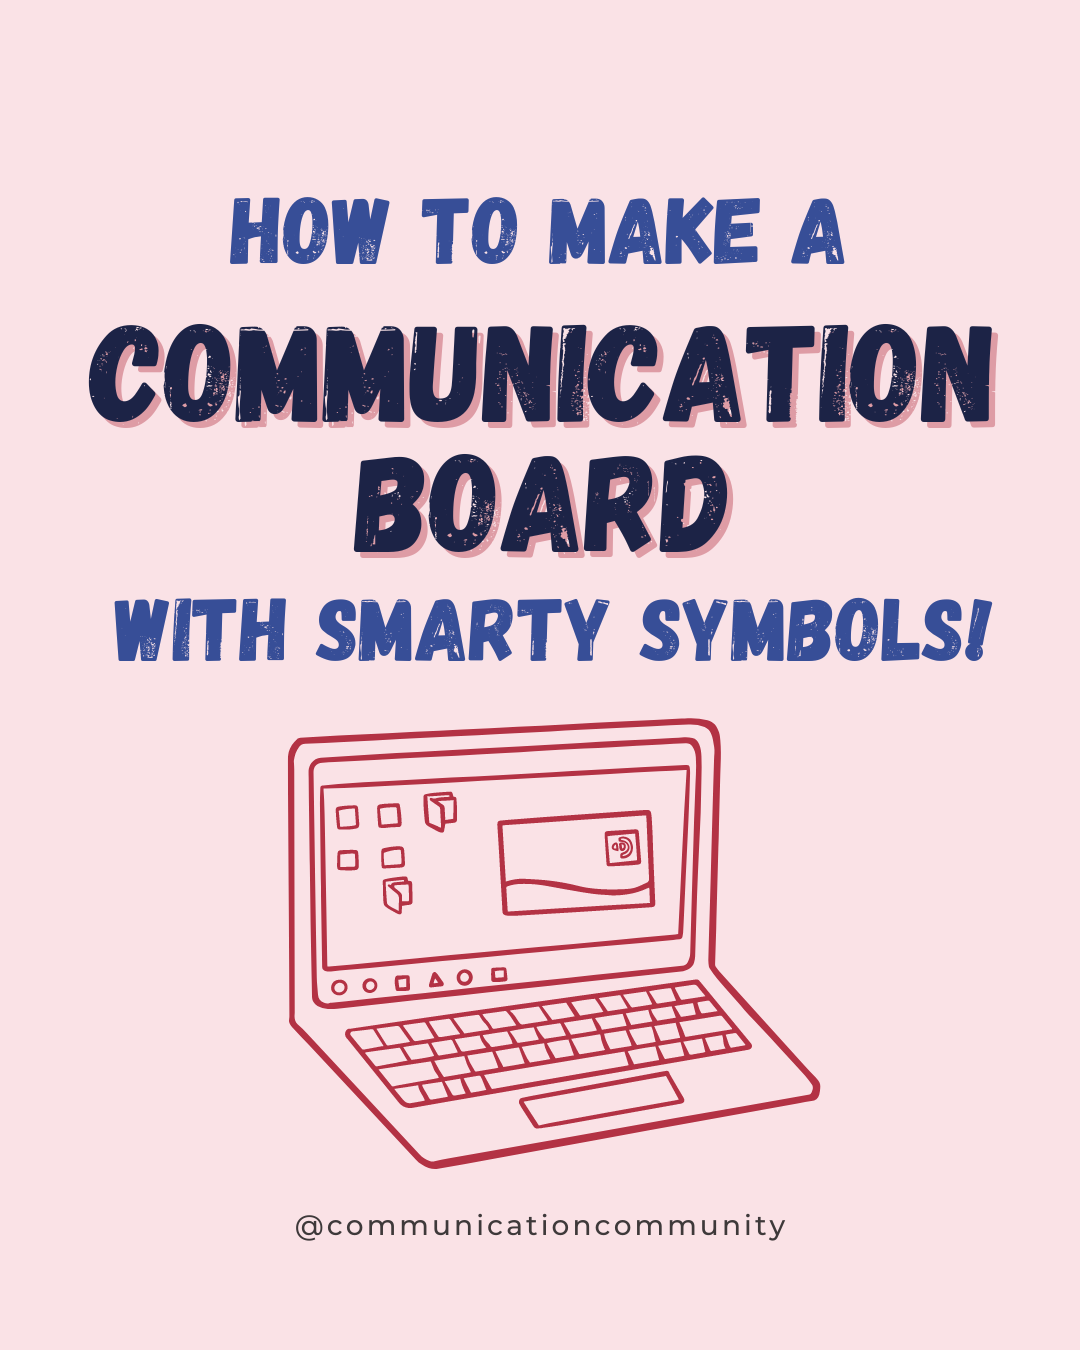 How To Make a Communication Board with Smarty Symbols